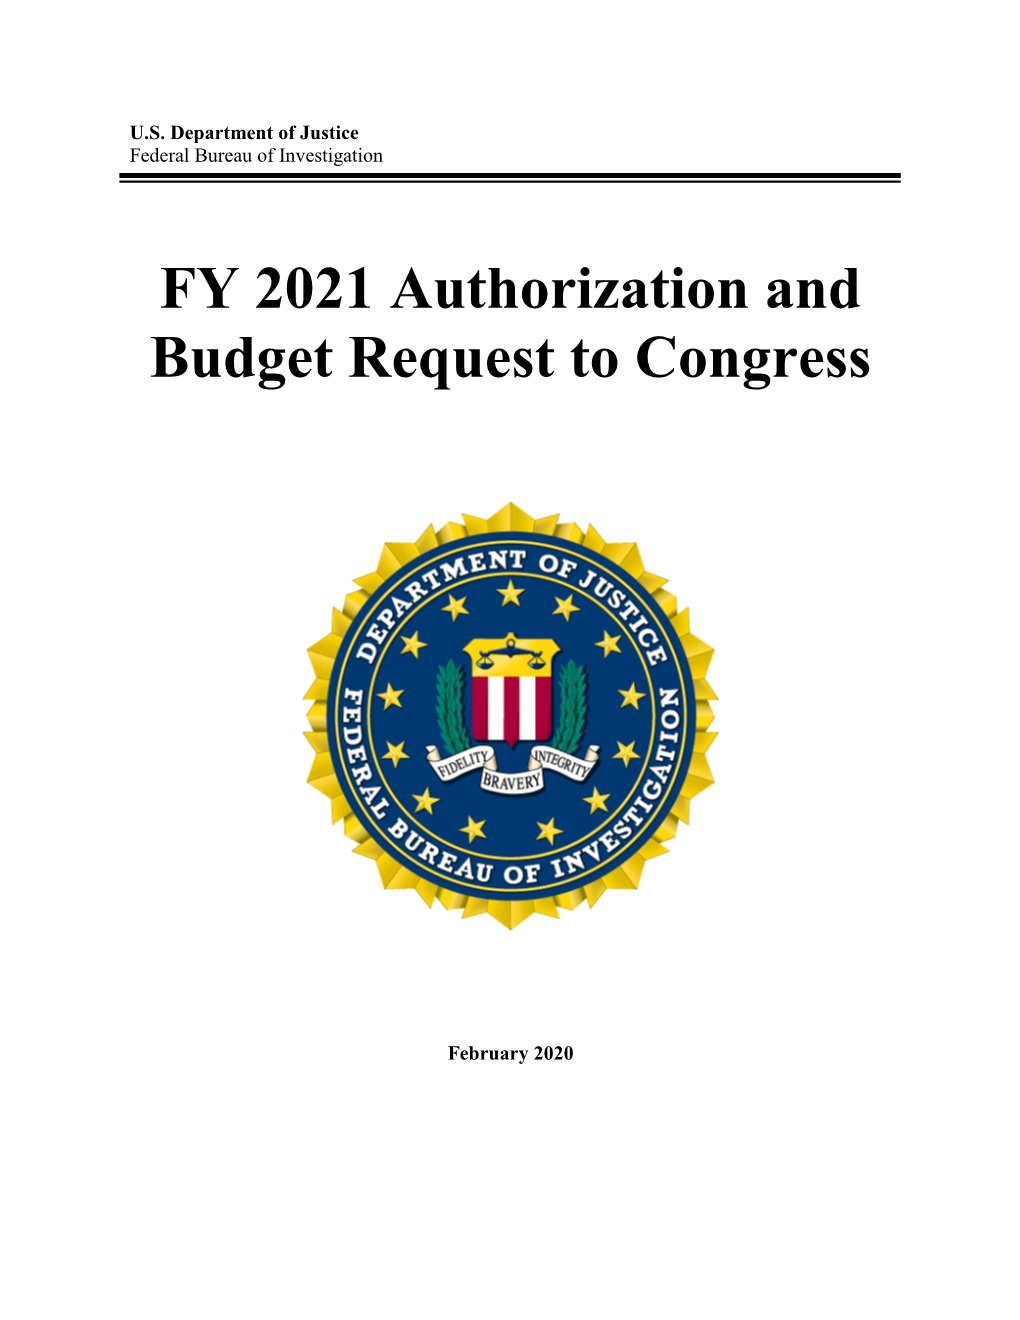 FY 2021 Authorization and Budget Request to Congress